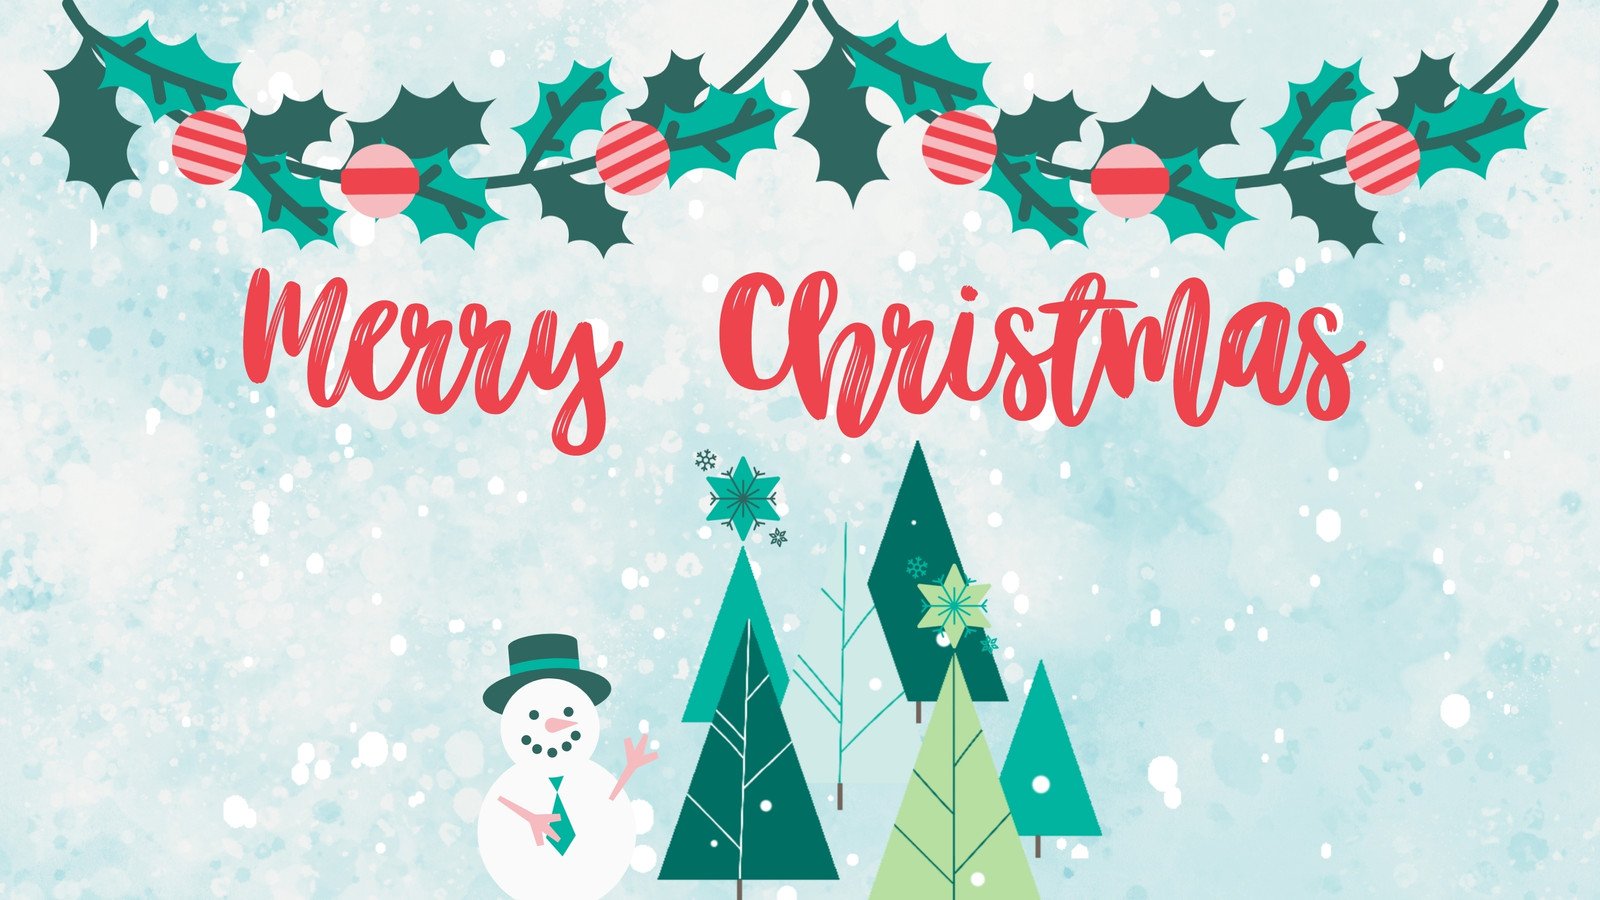 Free Christmas video templates to customize | Canva